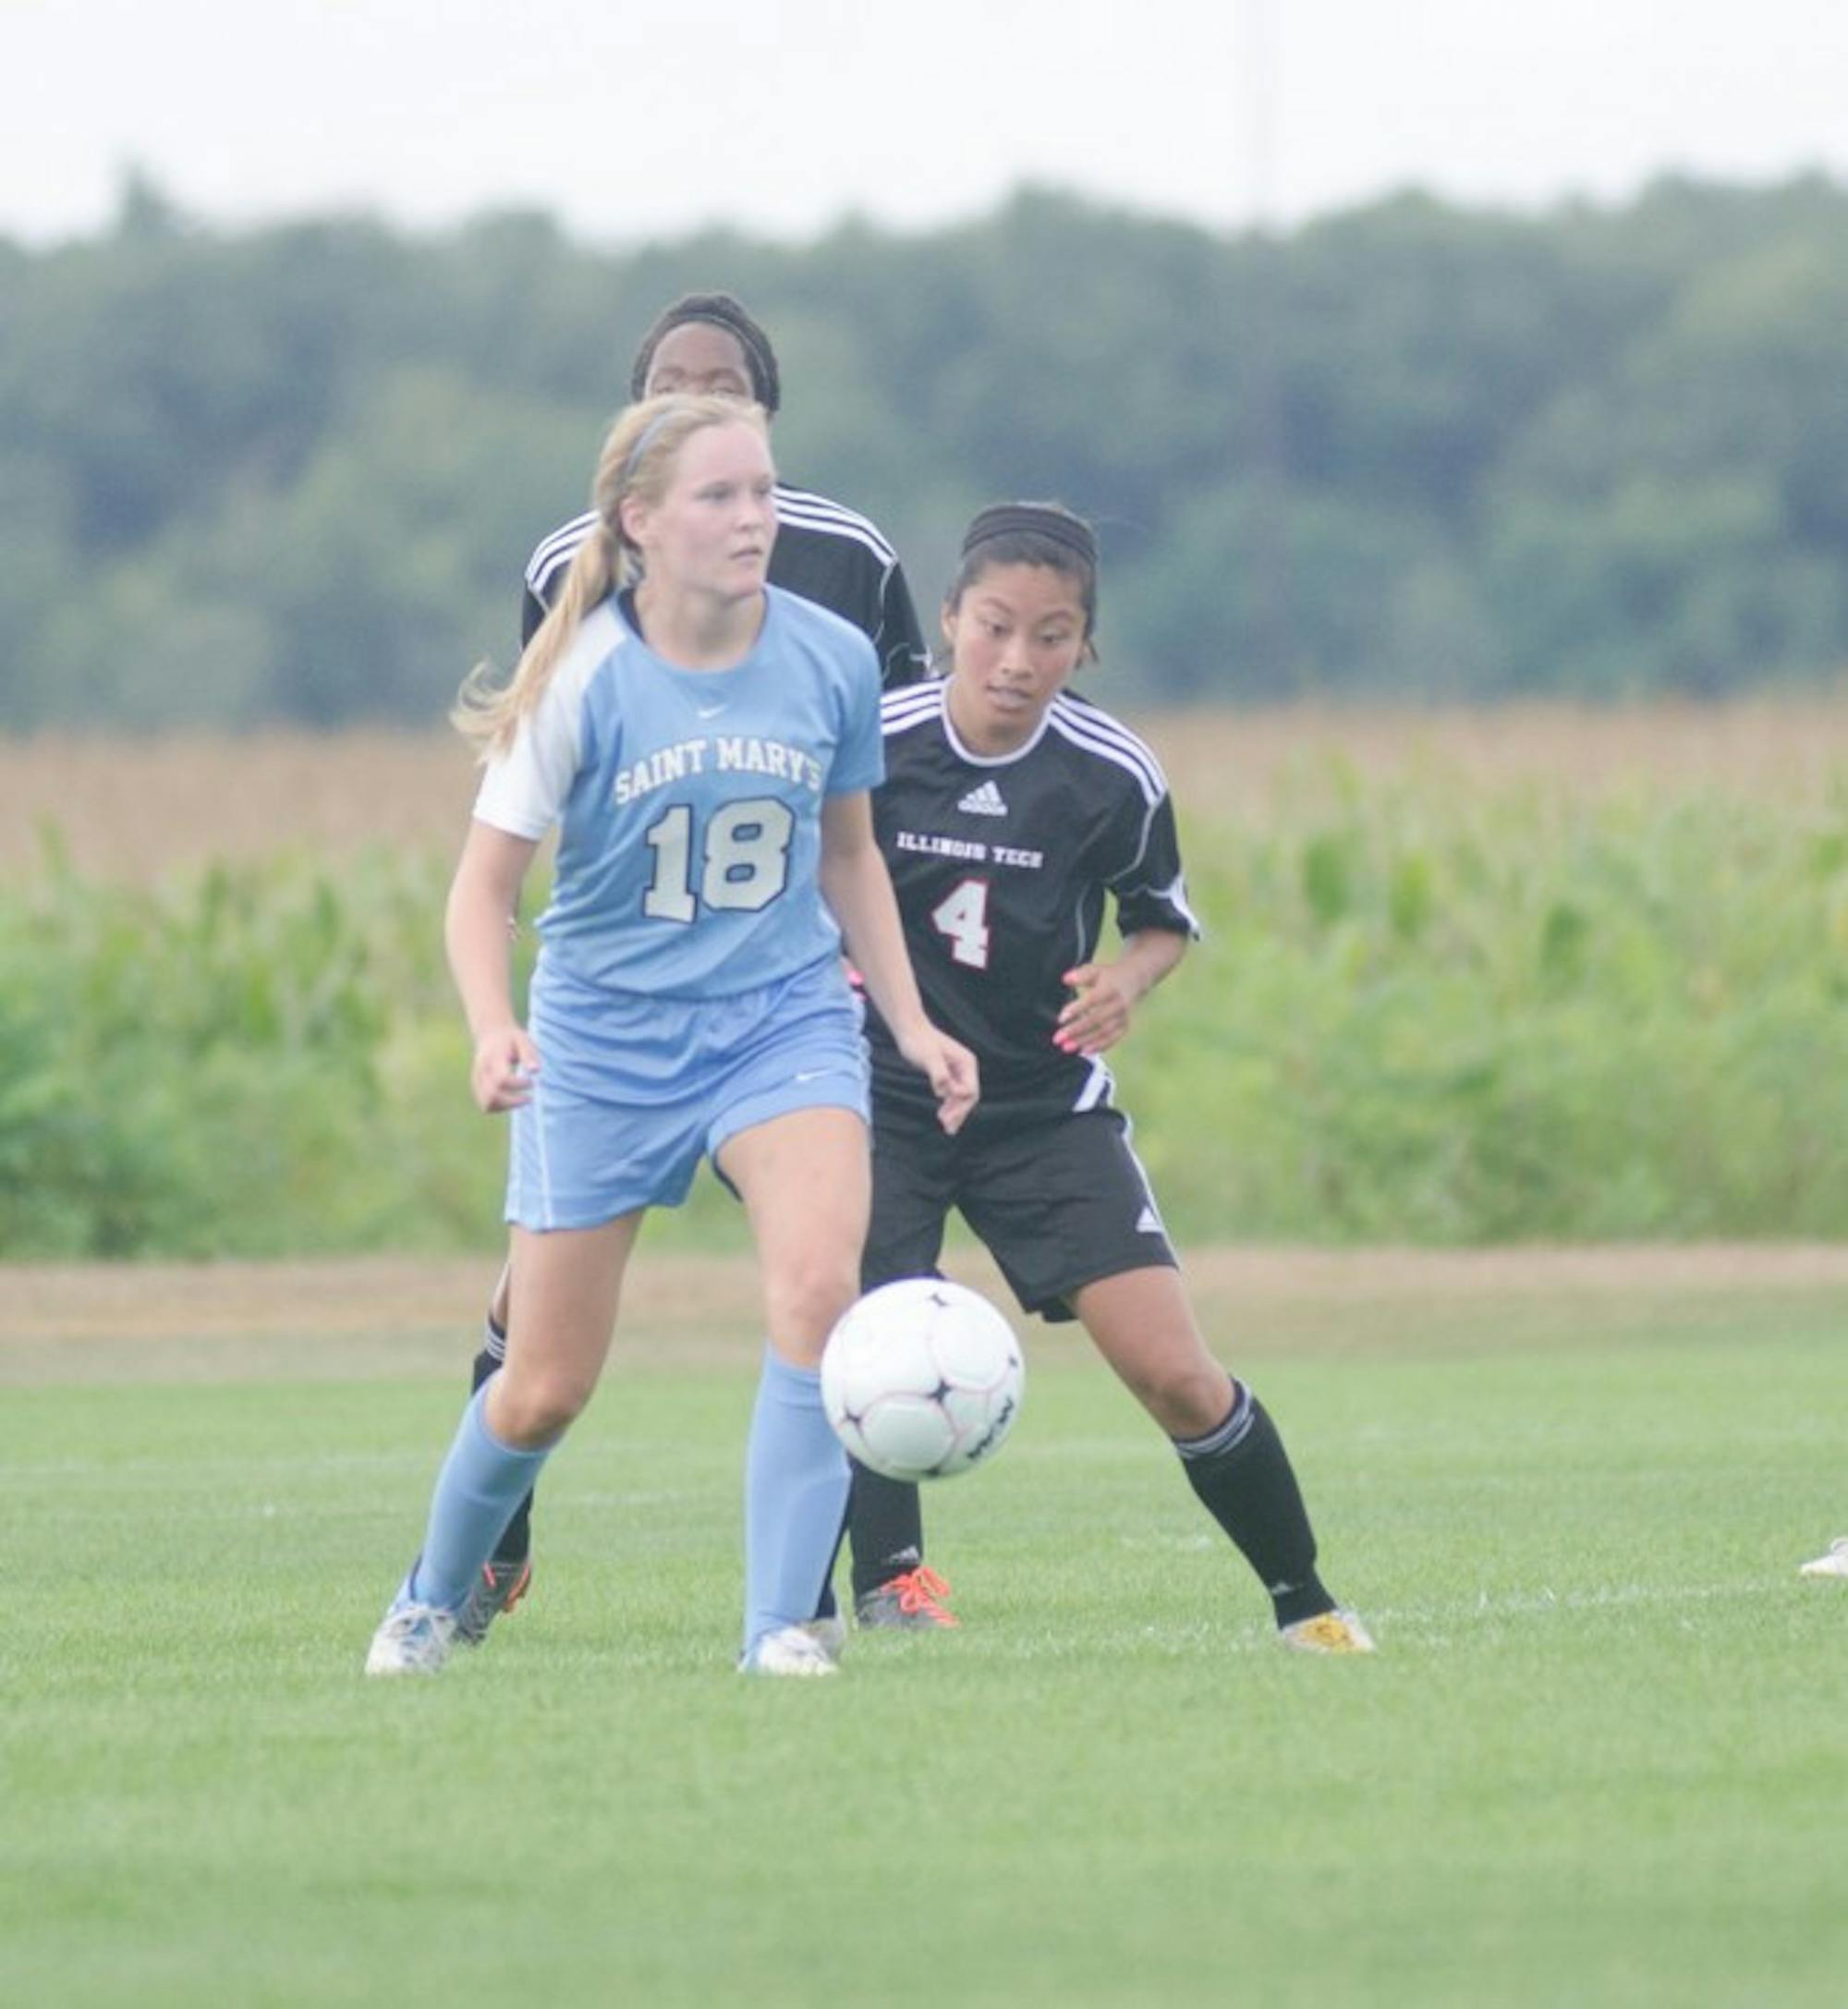 Saint Mary’s midfielder Maggie McLaughlin wards off defenders during the Belles’  4-1 victory over Illinois Tech on Sept. 2. McLaughlin started 19 games for the Belles in 2013.